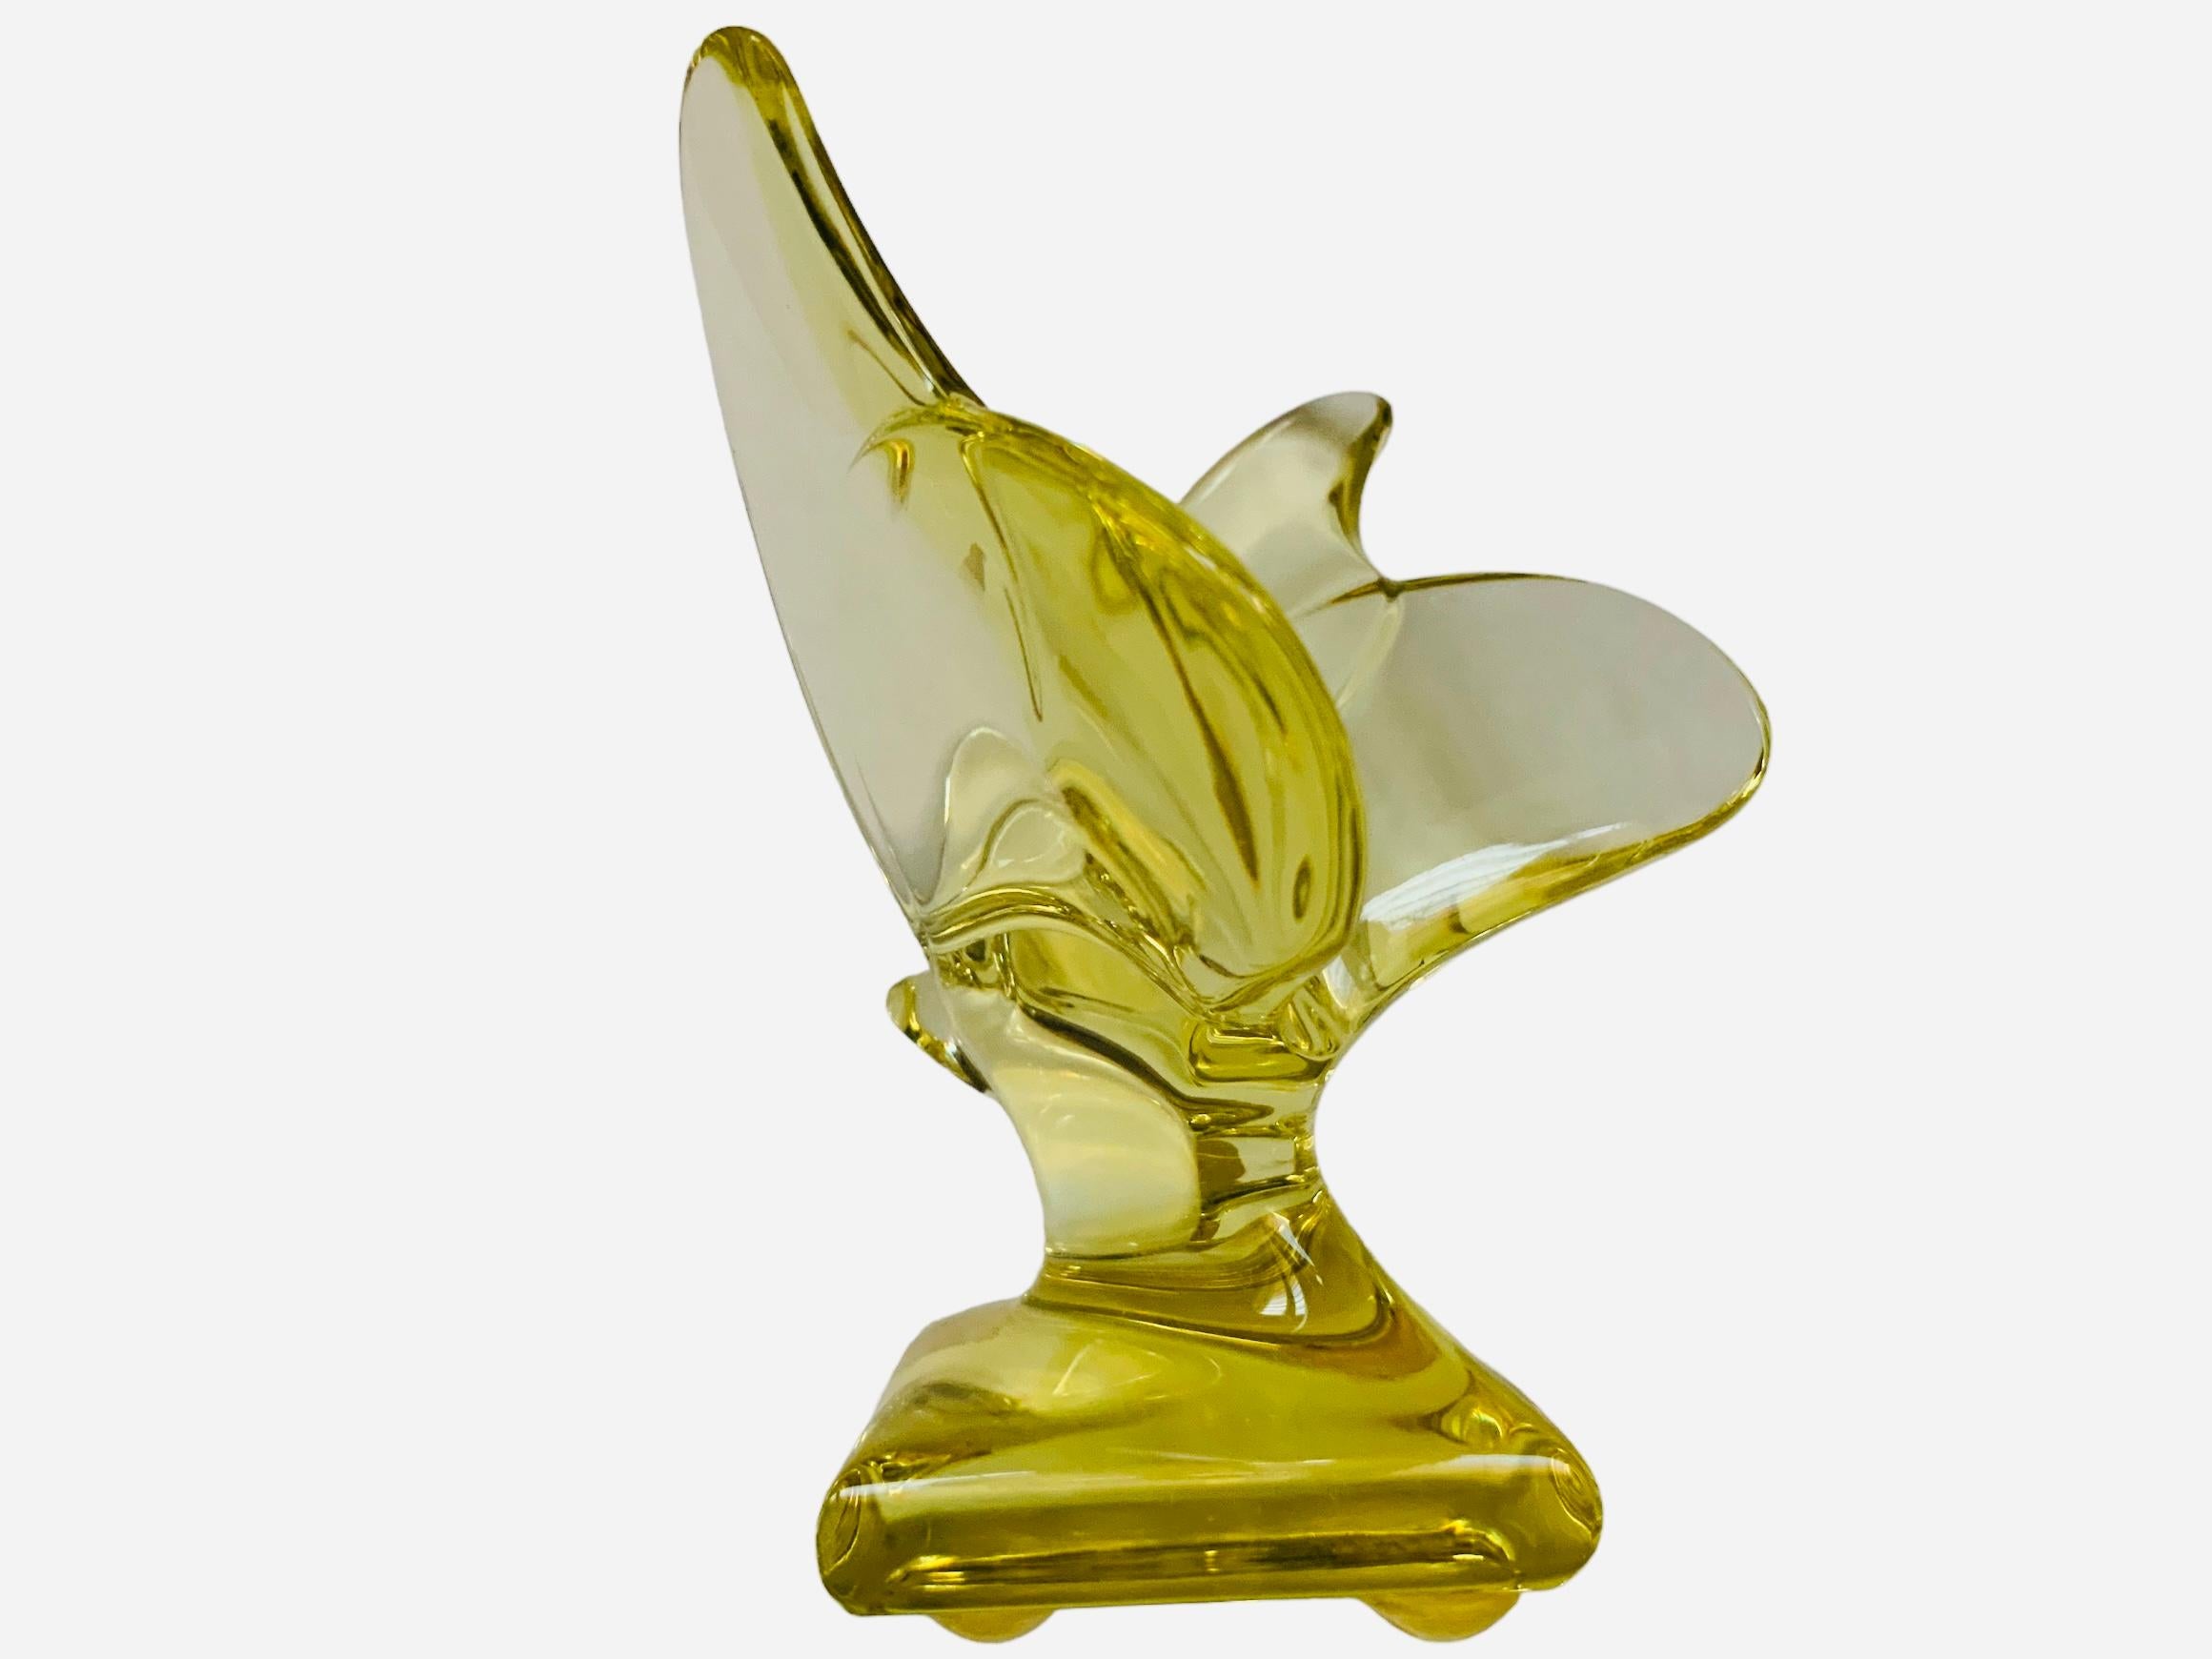 This is a Baccarat Crystal Butterfly sculpture/figurine . It depicts a light yellow color translucent crystal butterfly with its large wings open up supported also by a square crystal base. It has the acid etched hallmark of Baccarat  in one of the